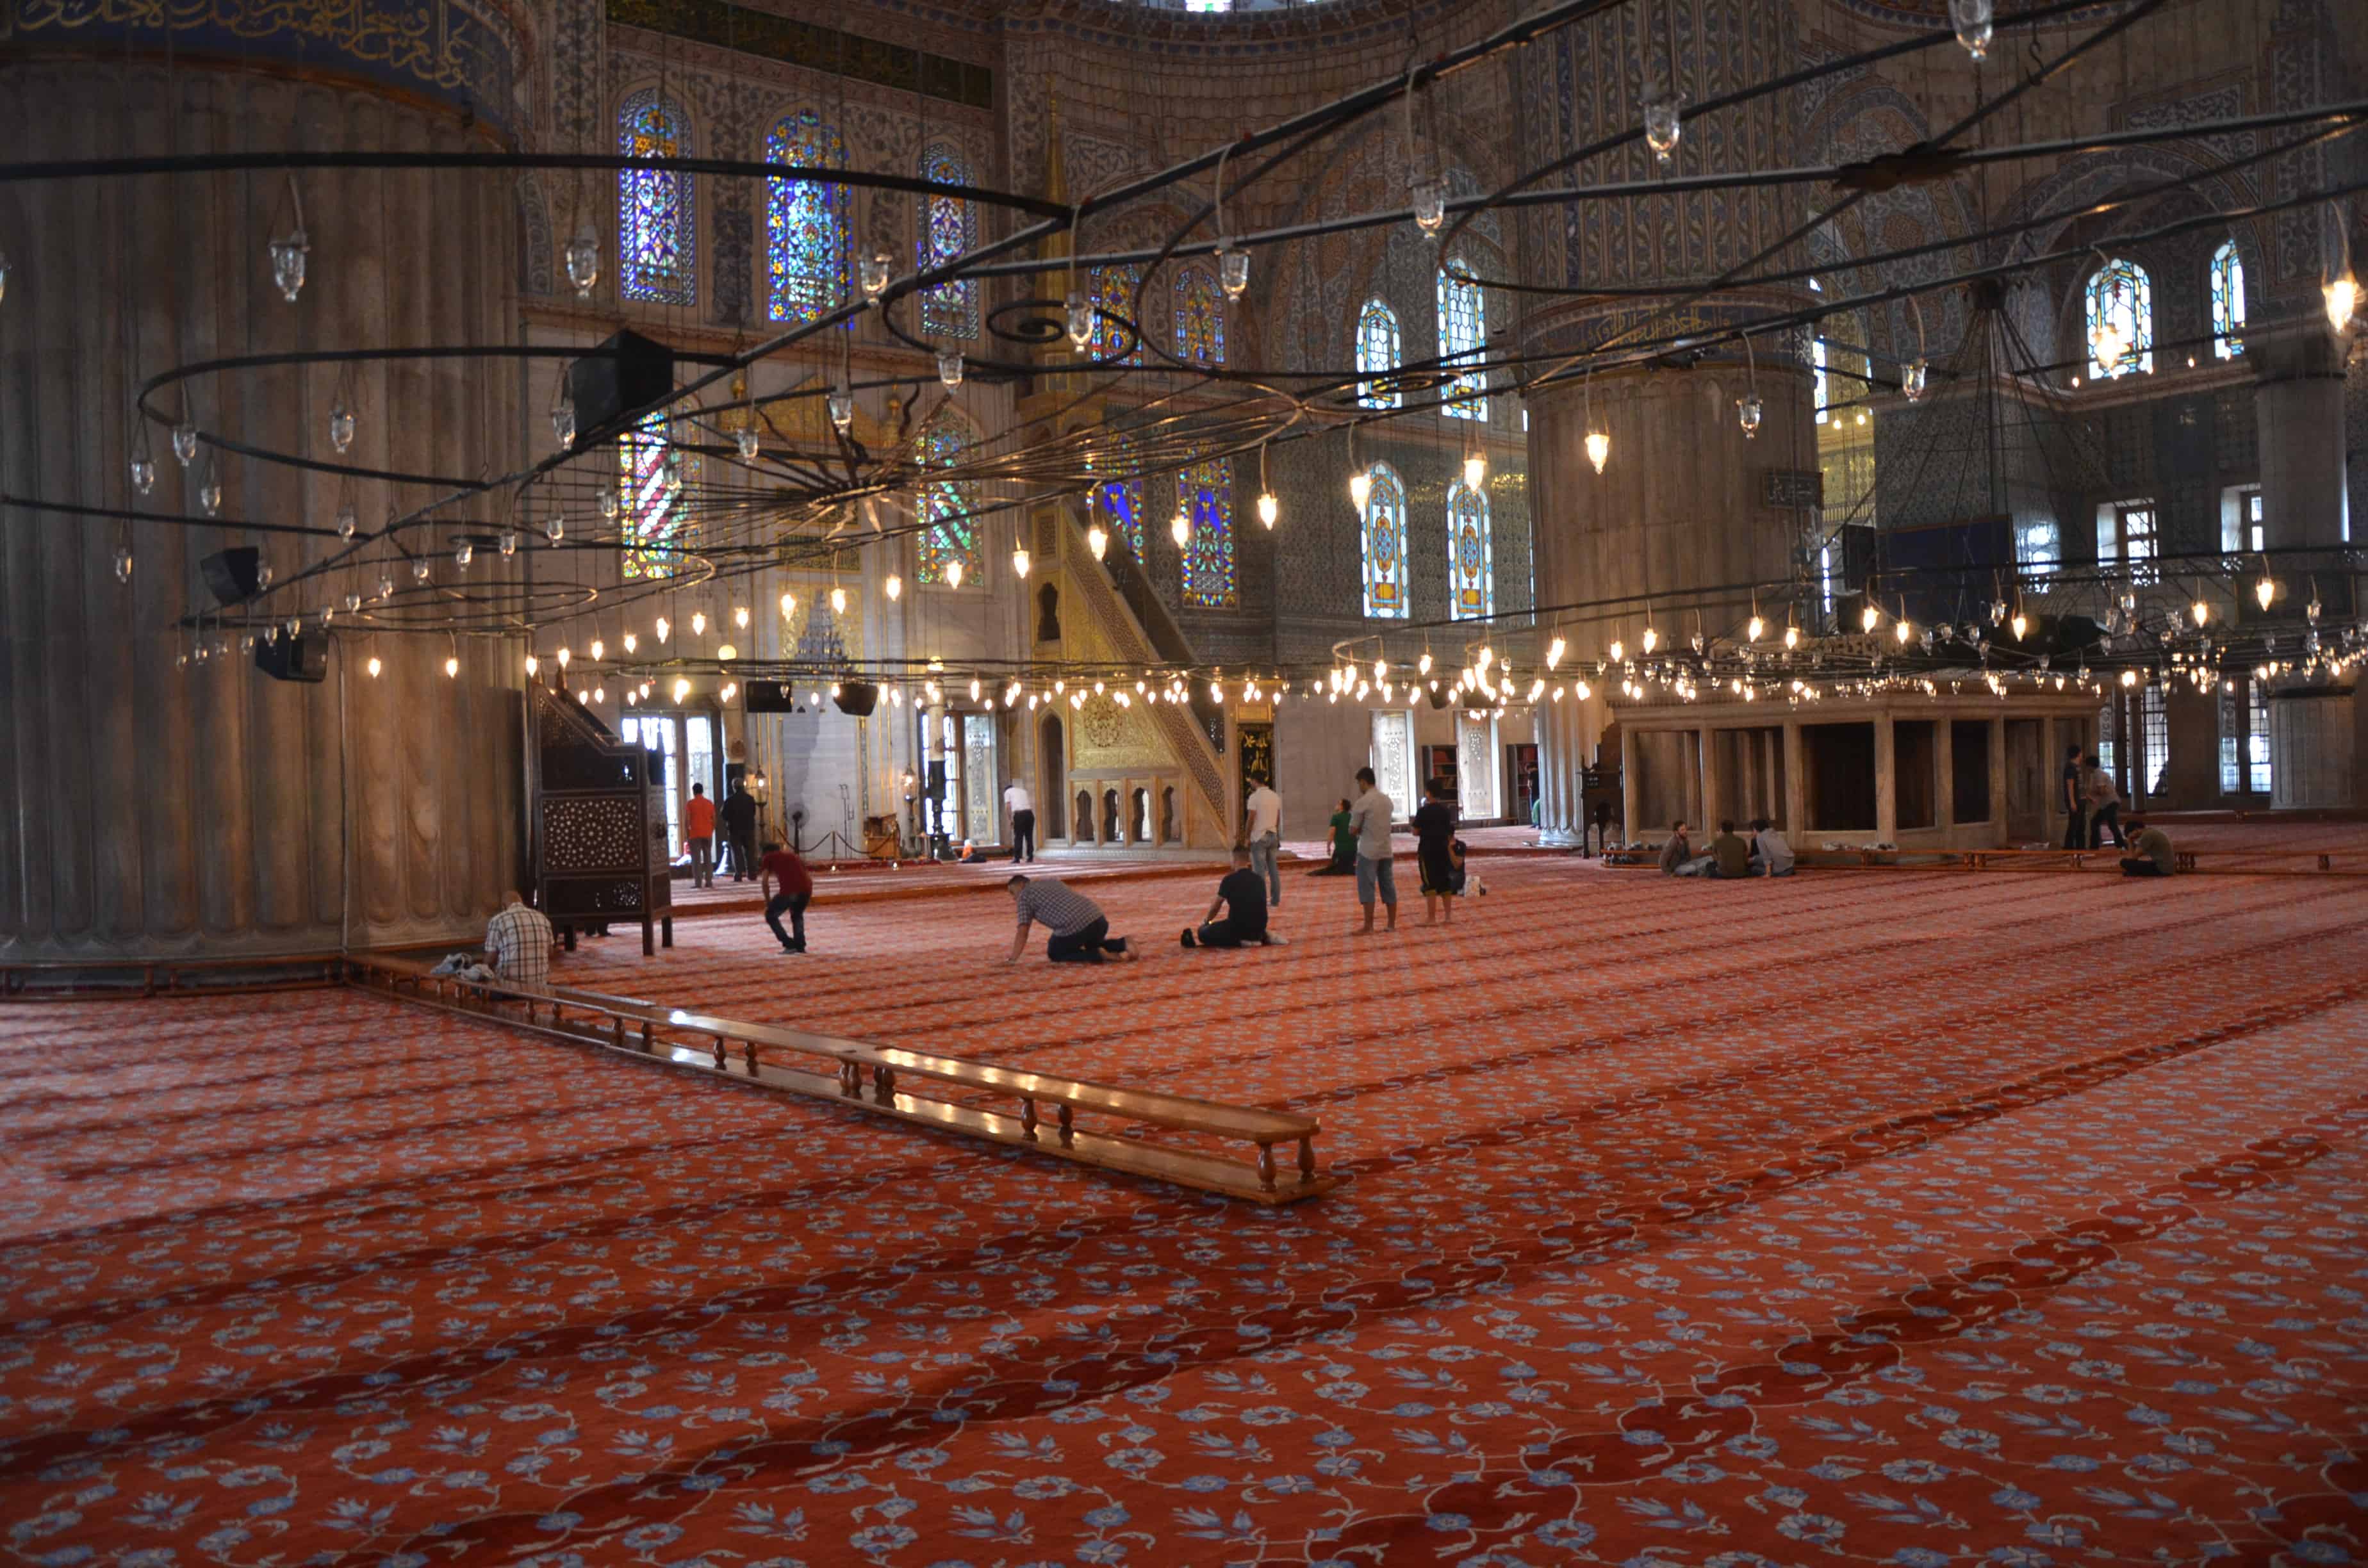 Prayer hall of the Blue Mosque in Fatih, Istanbul, Turkey